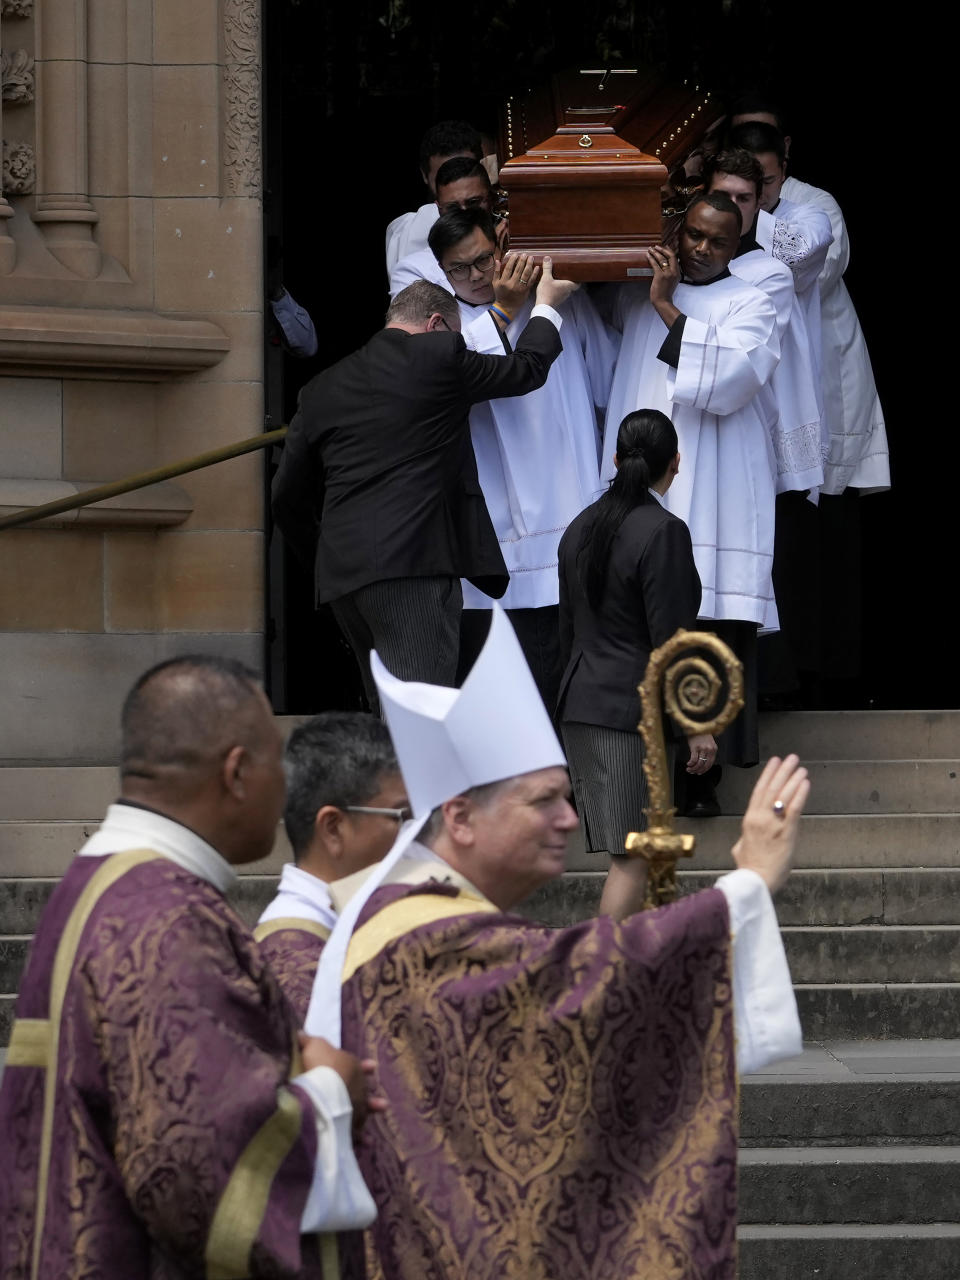 The coffin of Cardinal George Pell is carried out of St. Mary's Cathedral as Archbishop Anthony Fisher, bottom right, gestures following Pell's funeral in Sydney, Thursday, Feb. 2, 2023. Pell, who died last month at age 81, spent more than a year in prison before his sex abuse convictions were overturned in 2020. (AP Photo/Rick Rycroft)